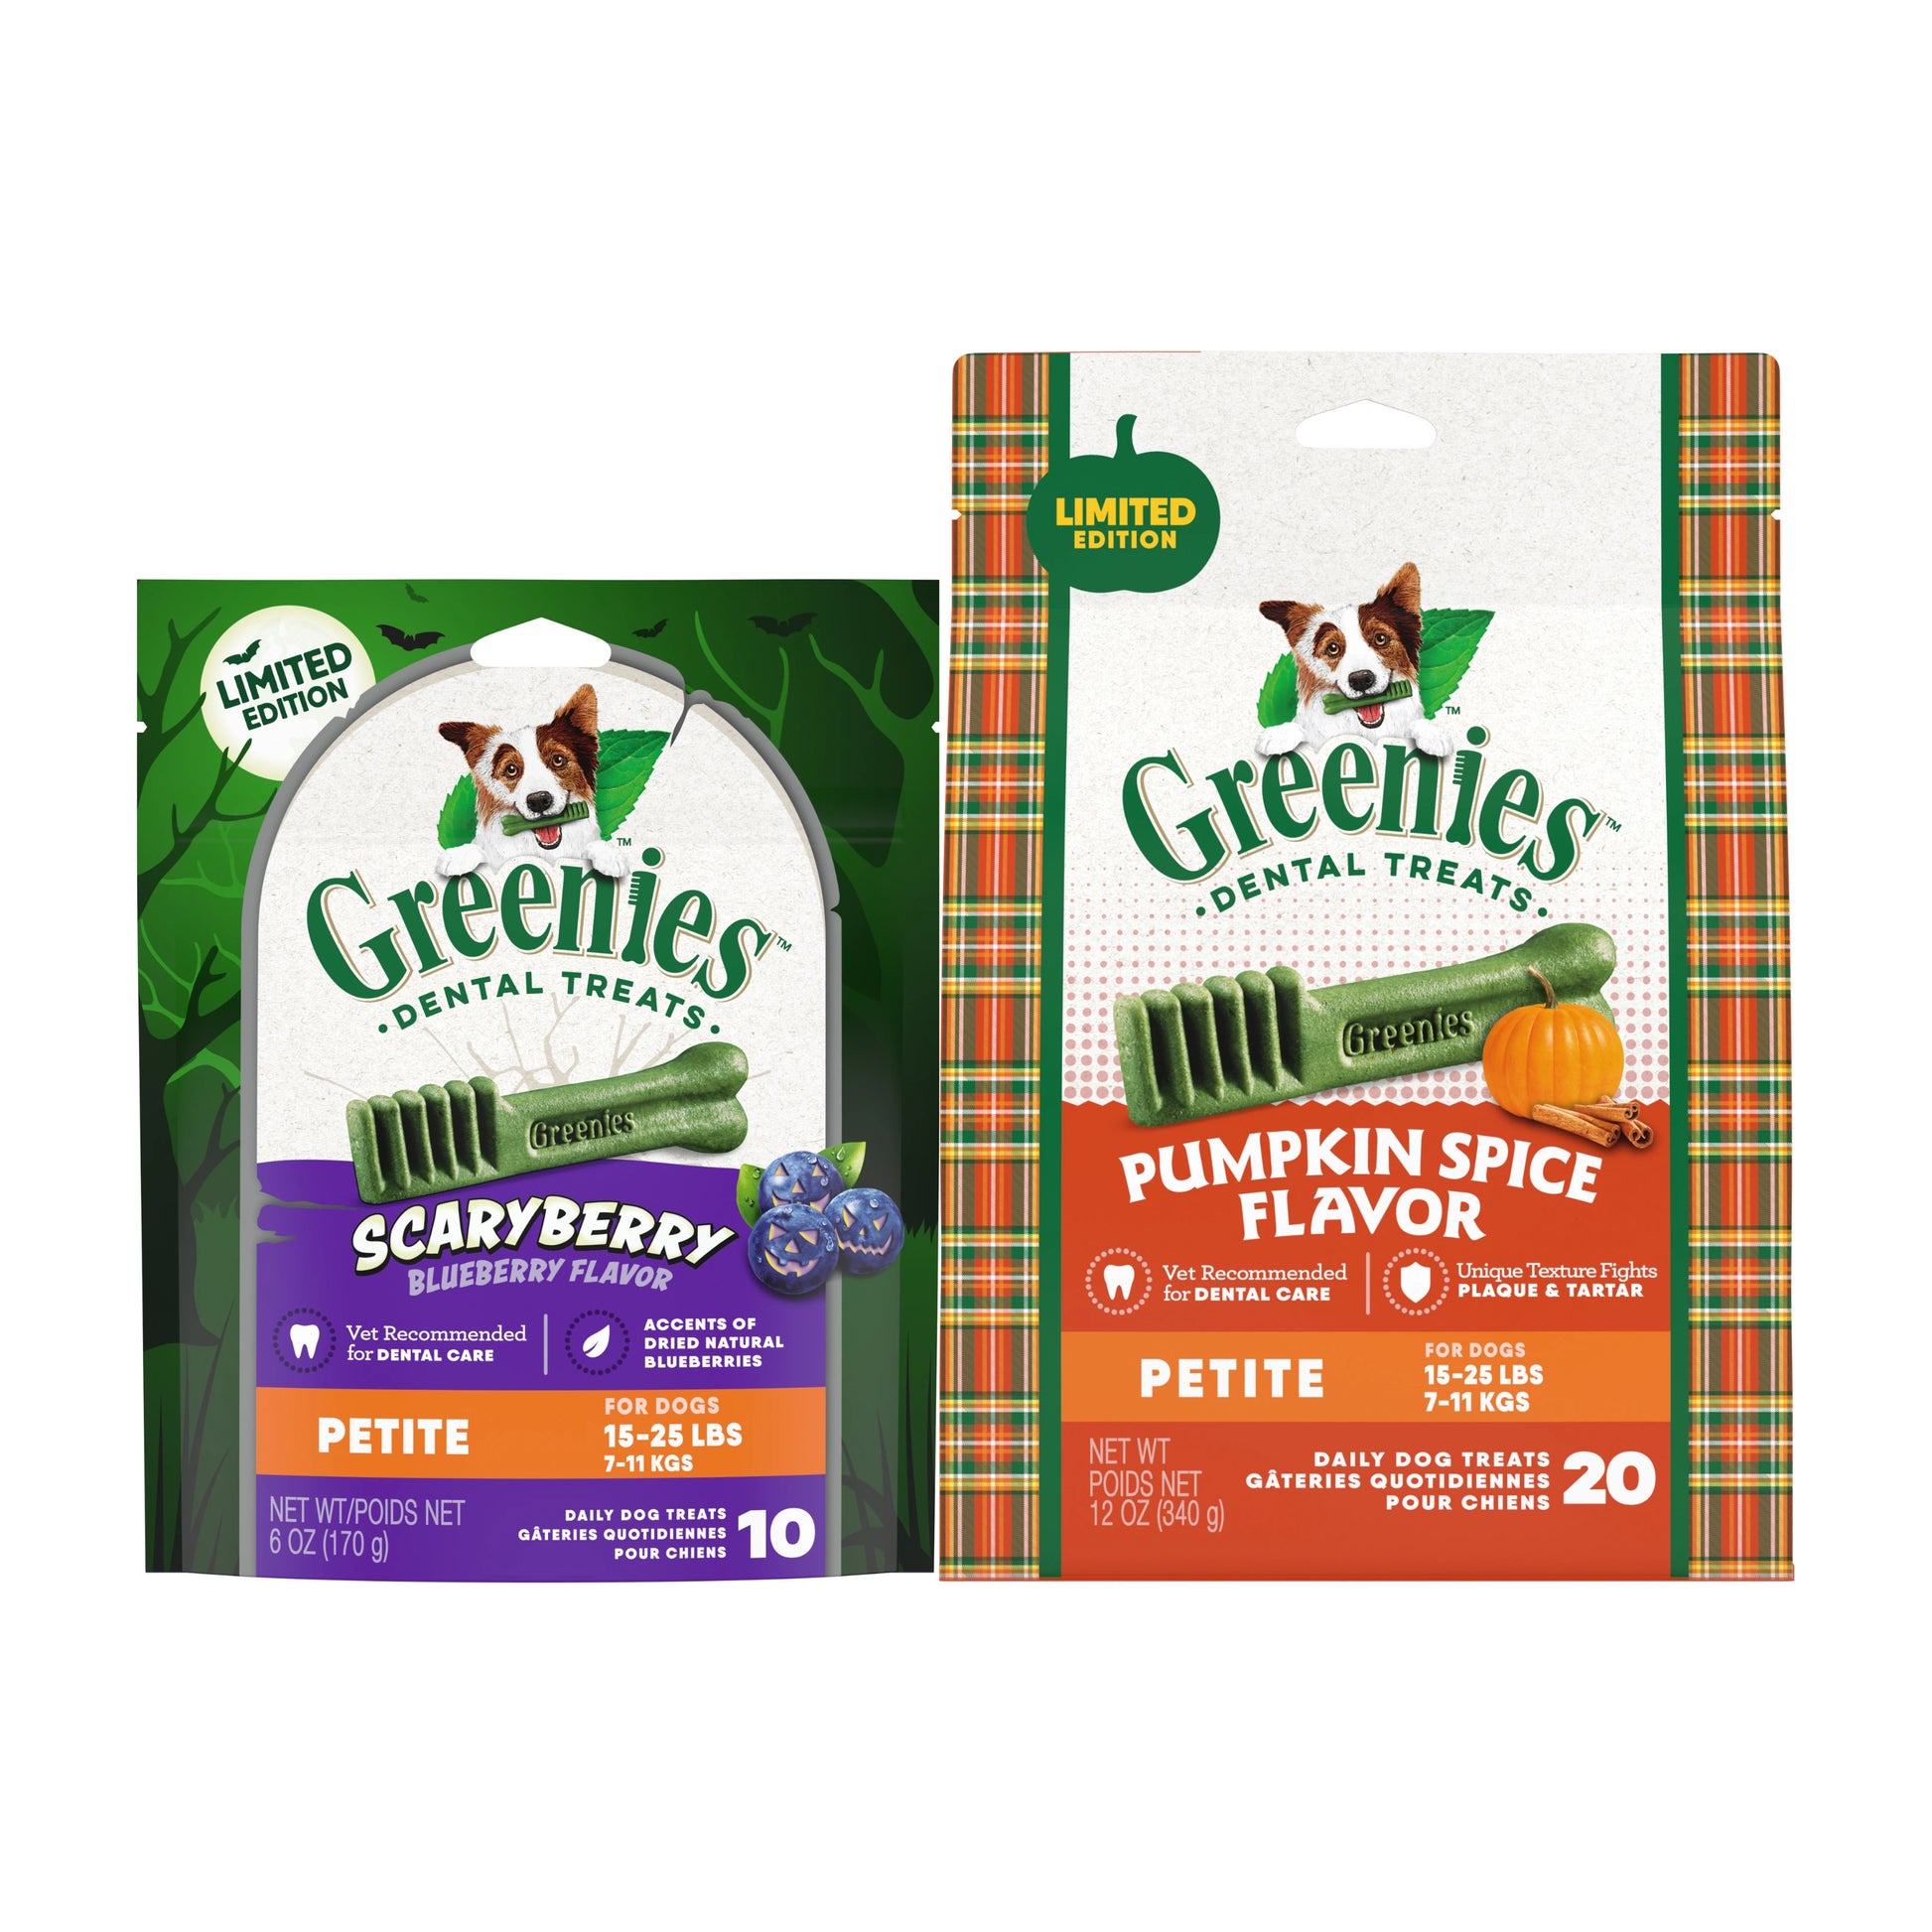 Greenies Halloween Dental Treat Bundle for Petite Size Dogs, Scaryberry and Pumpkin Spice